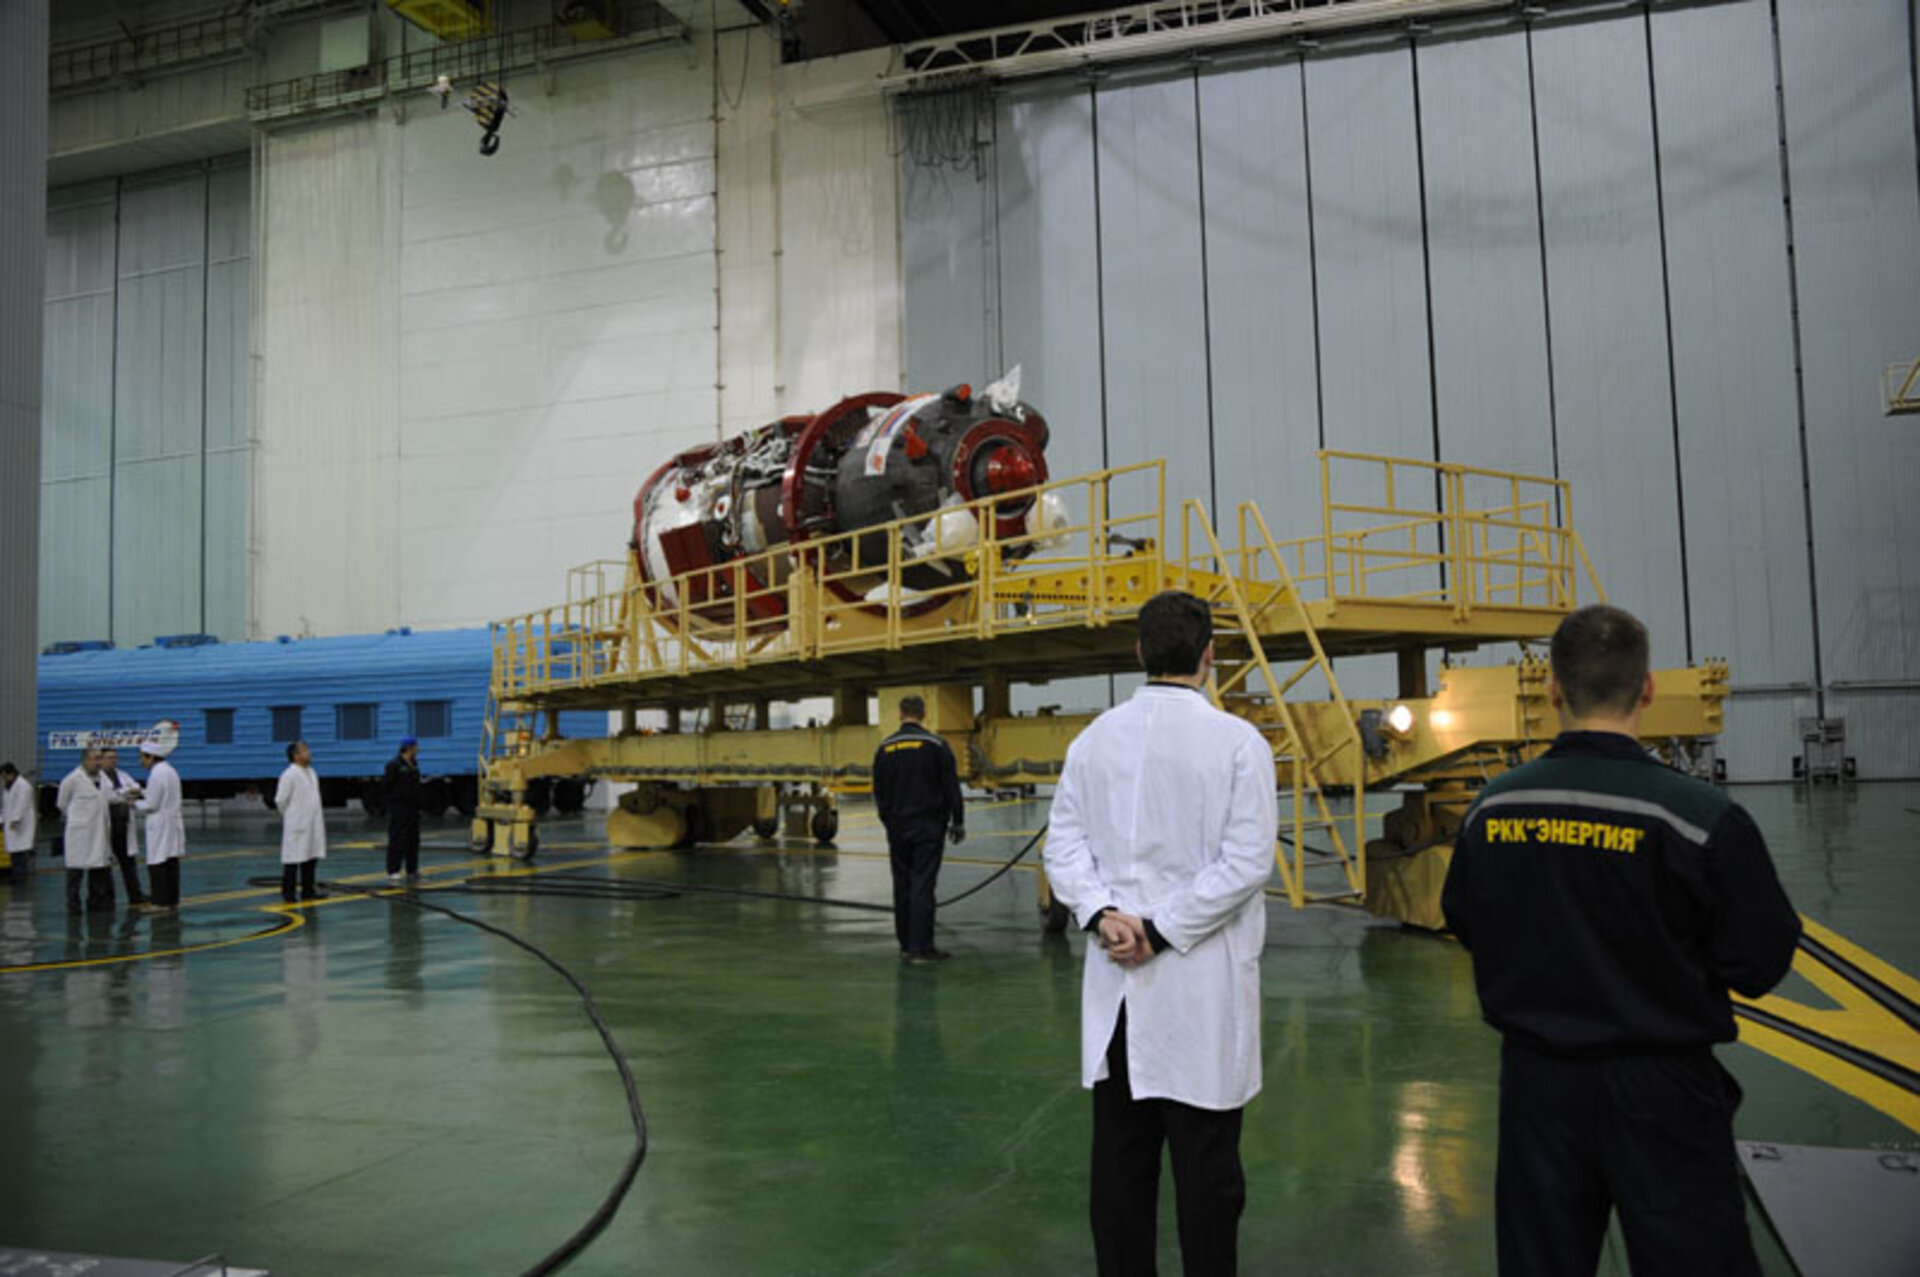 Soyuz TMA-03M delivered to Assembly and Testing Facility